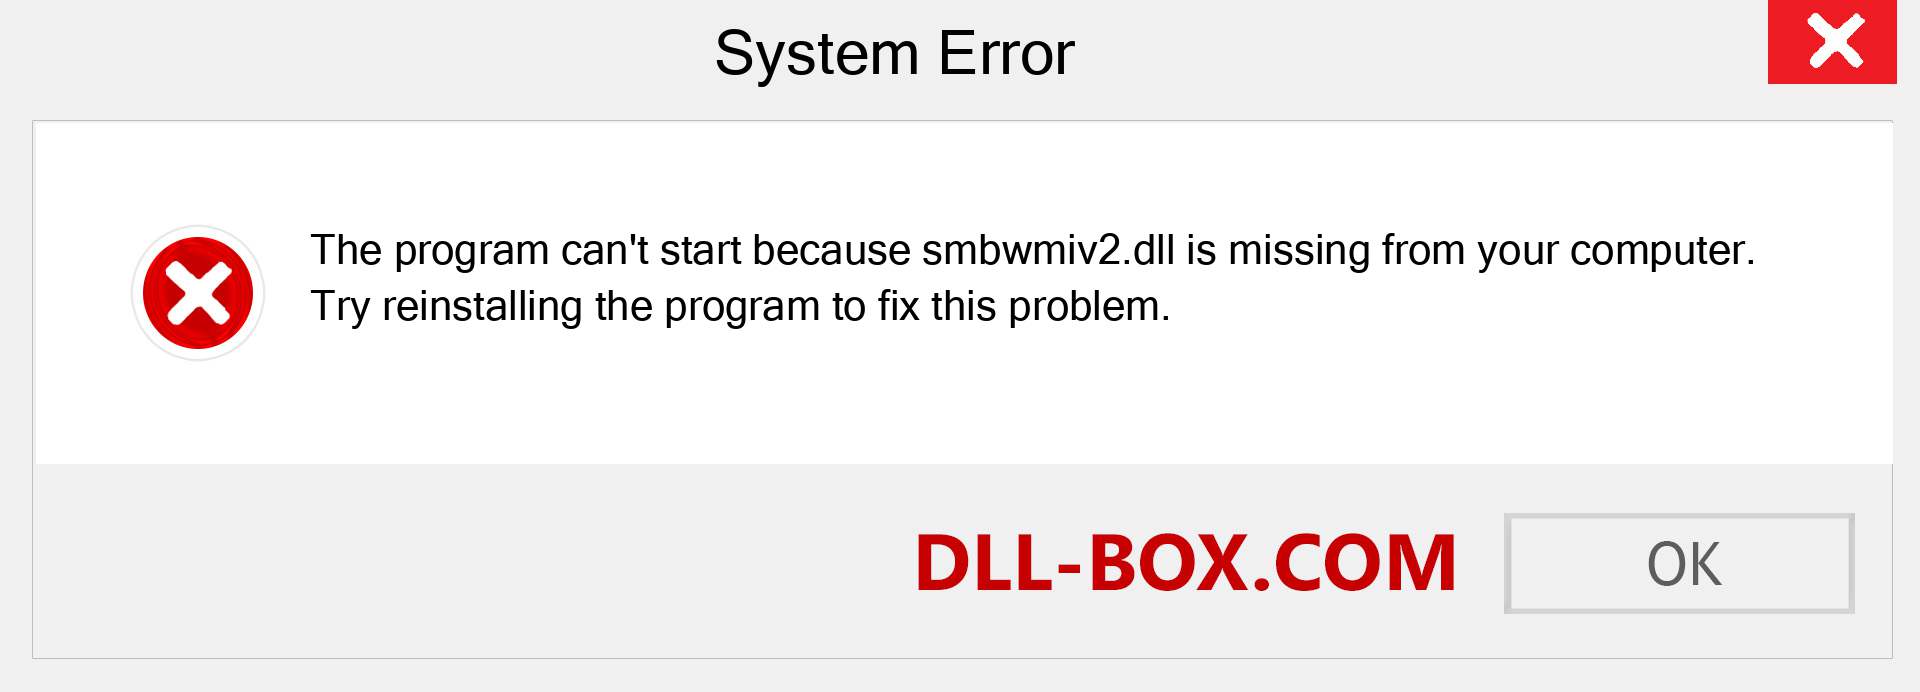  smbwmiv2.dll file is missing?. Download for Windows 7, 8, 10 - Fix  smbwmiv2 dll Missing Error on Windows, photos, images